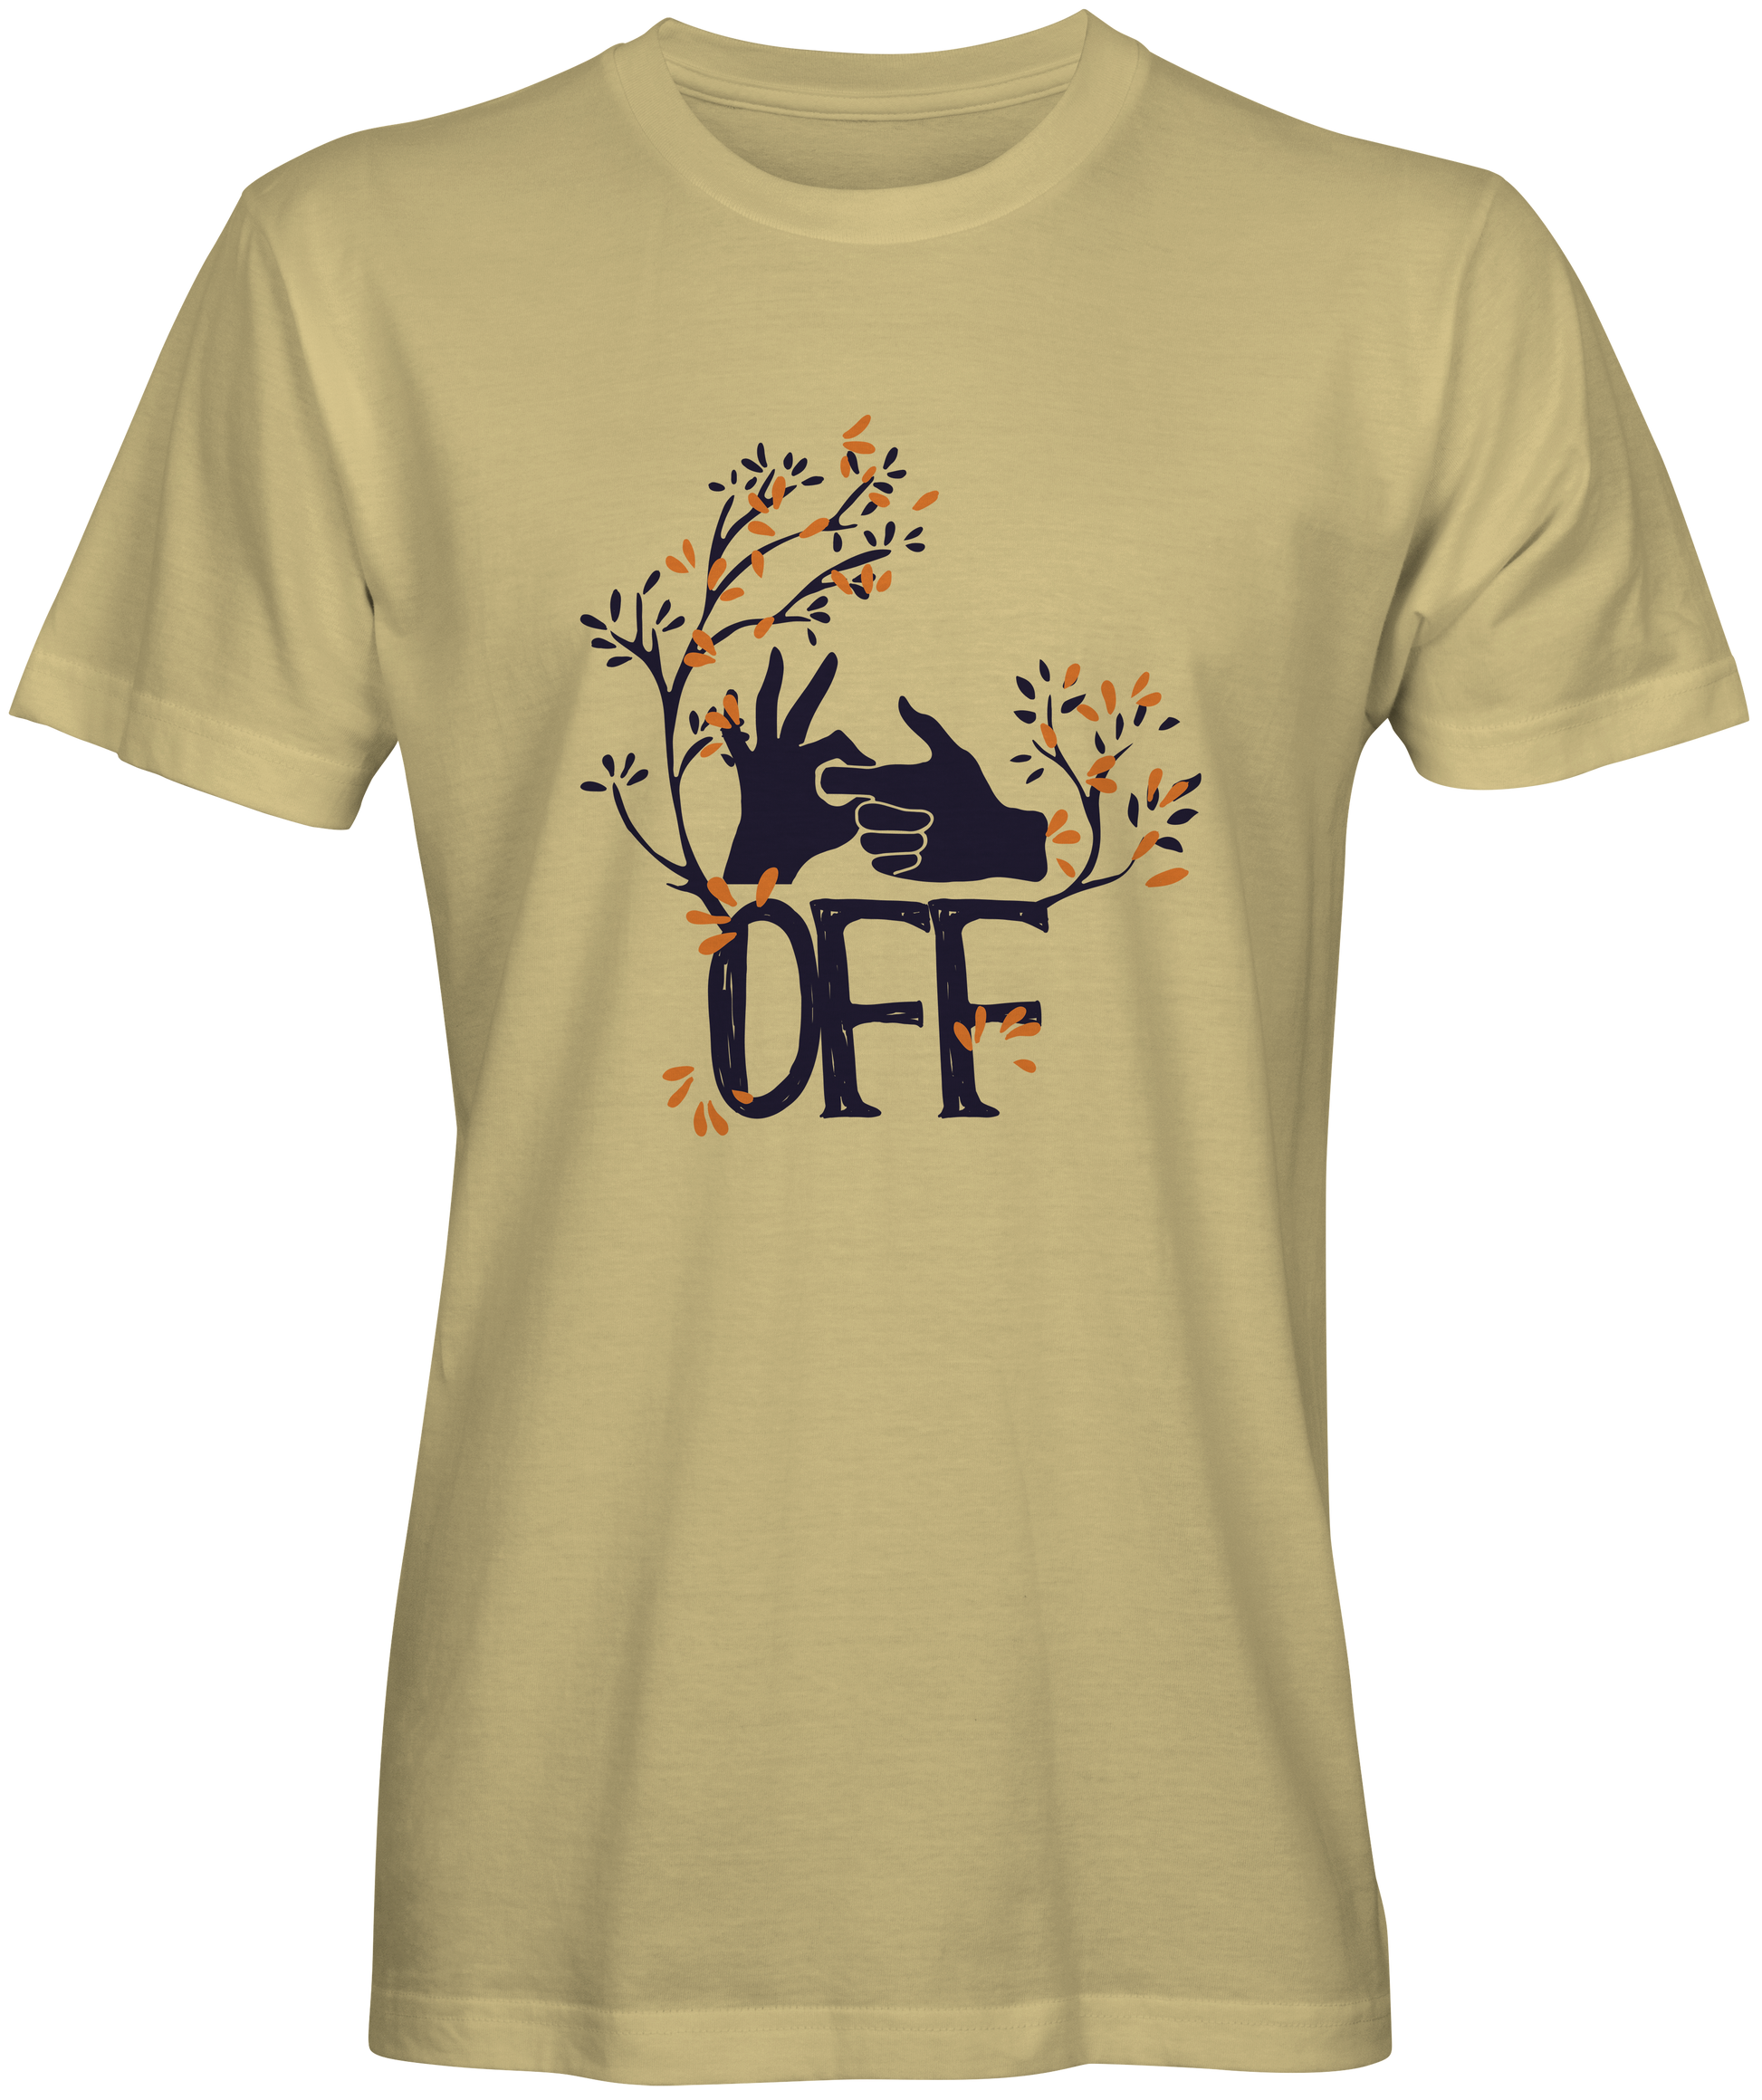  F Off Graphic Tee